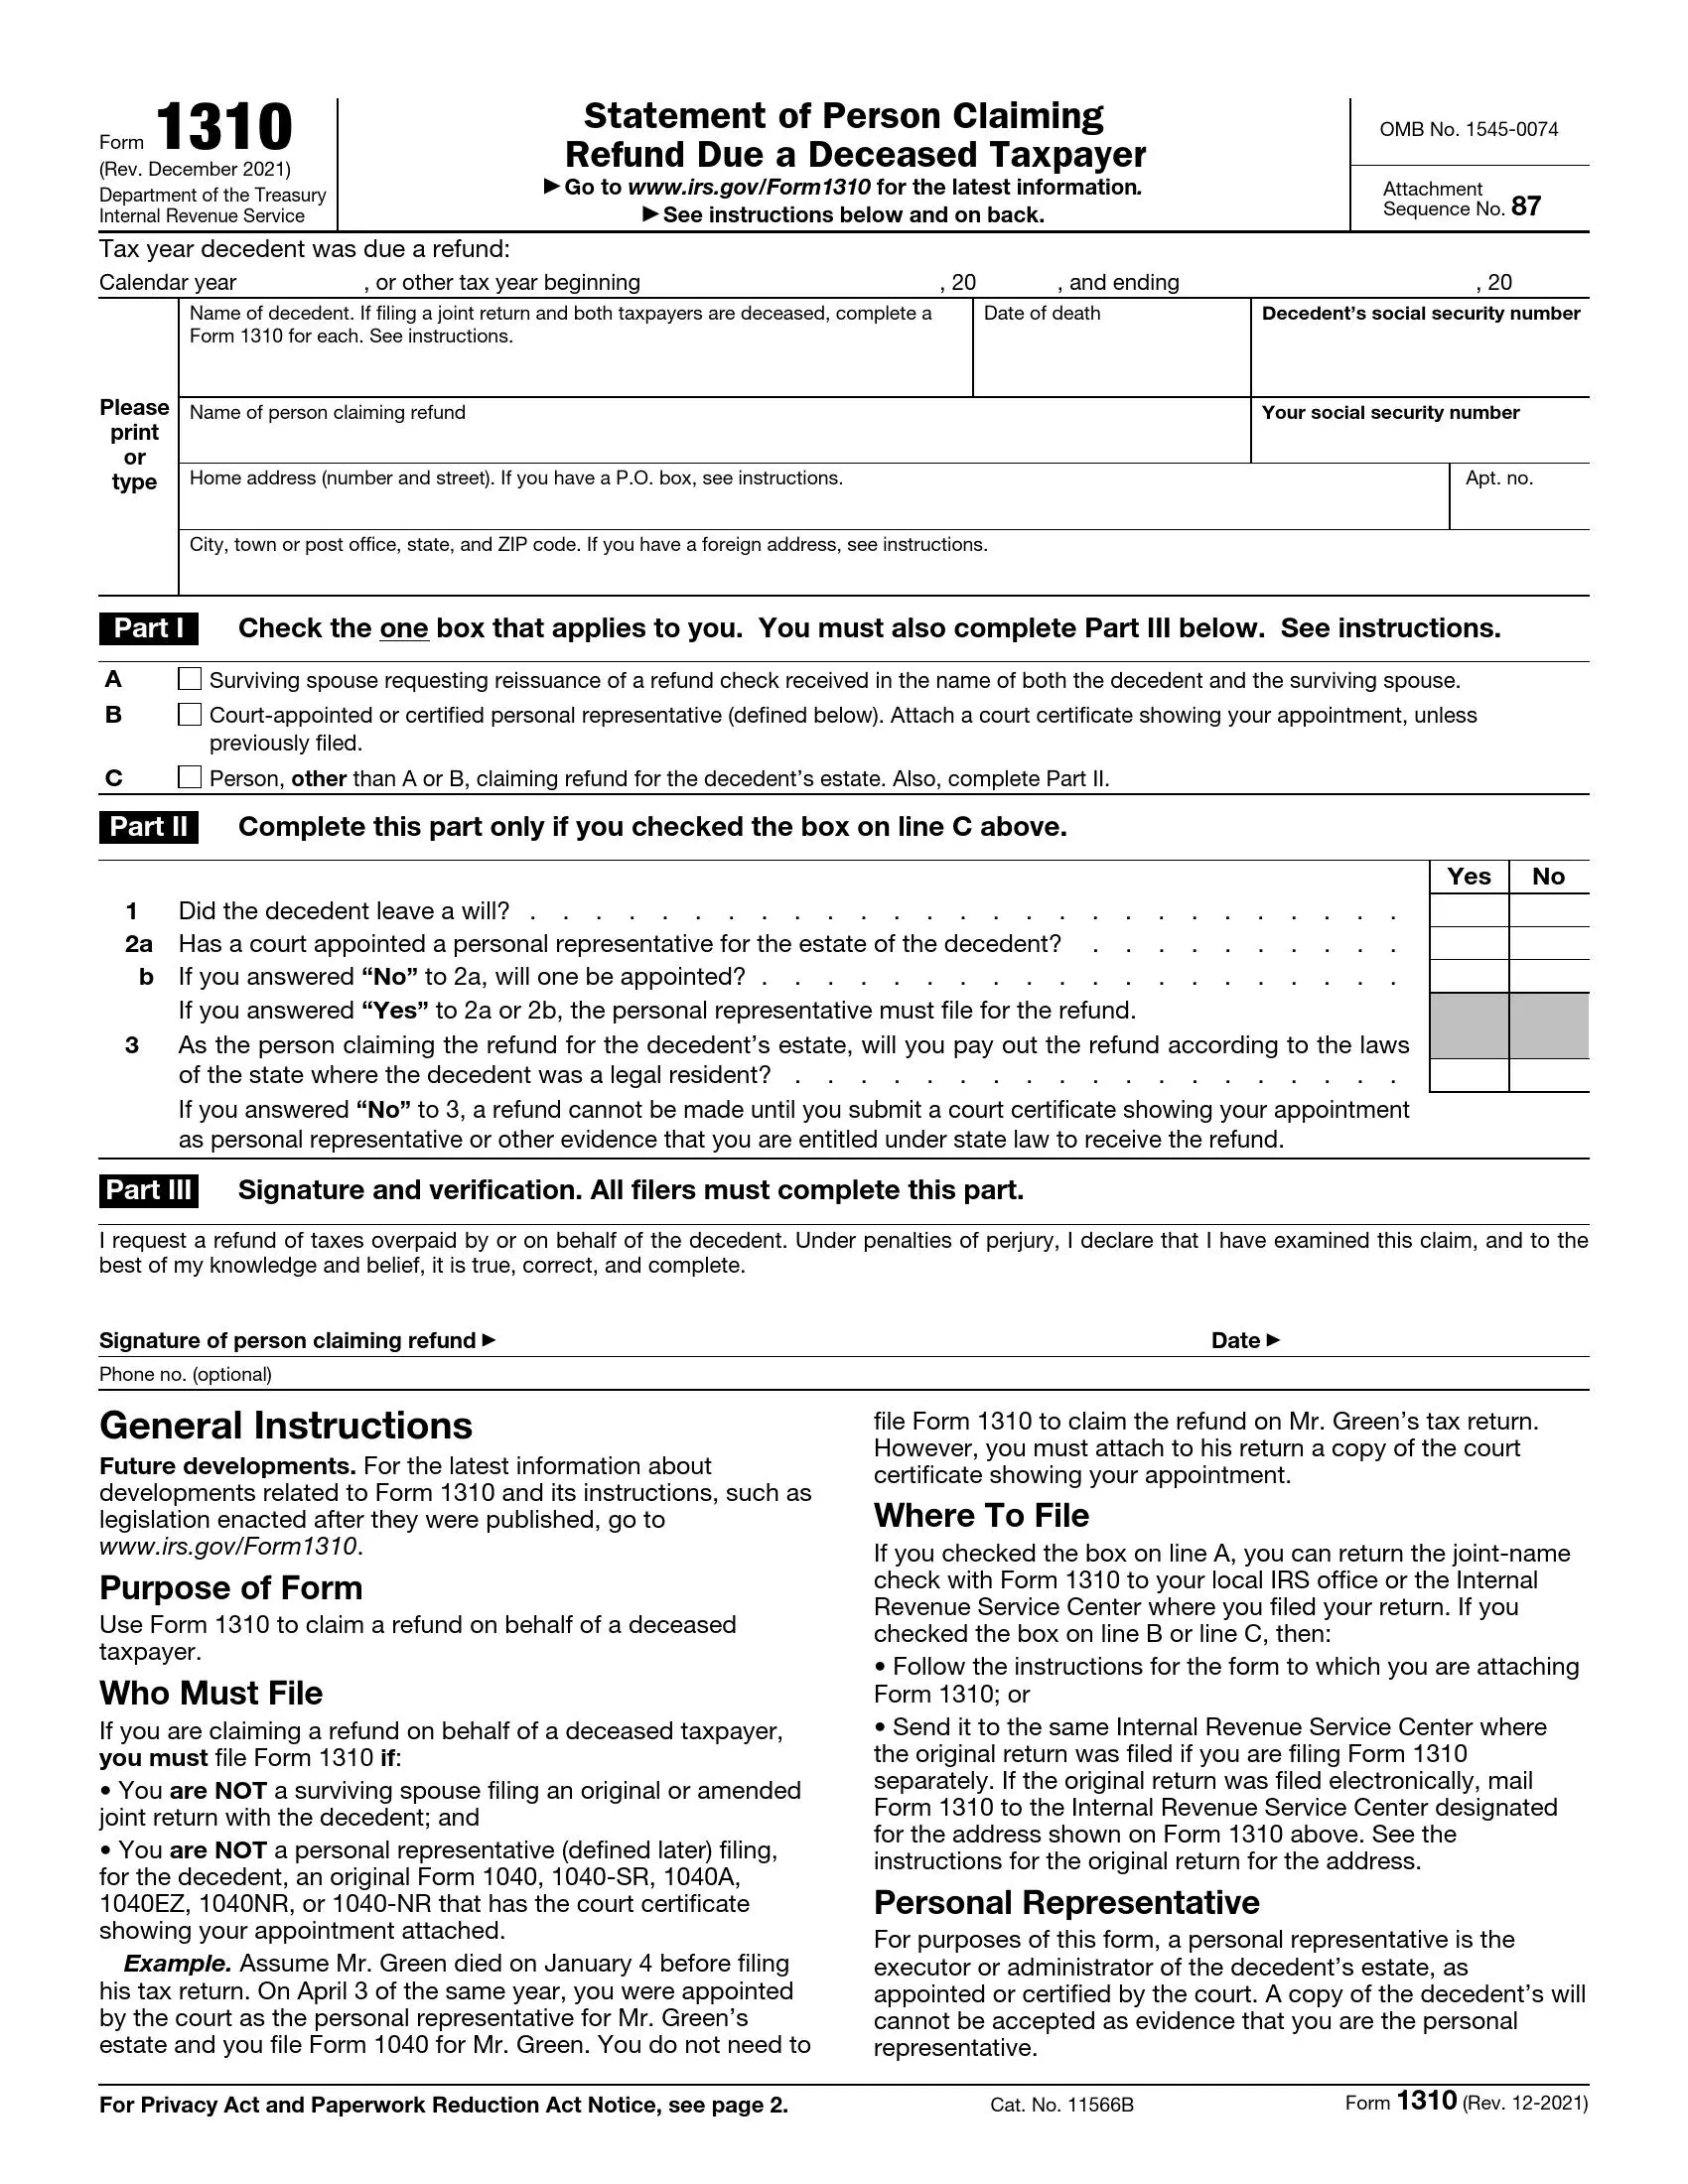 irs form 1310 rev 12 2021 preview